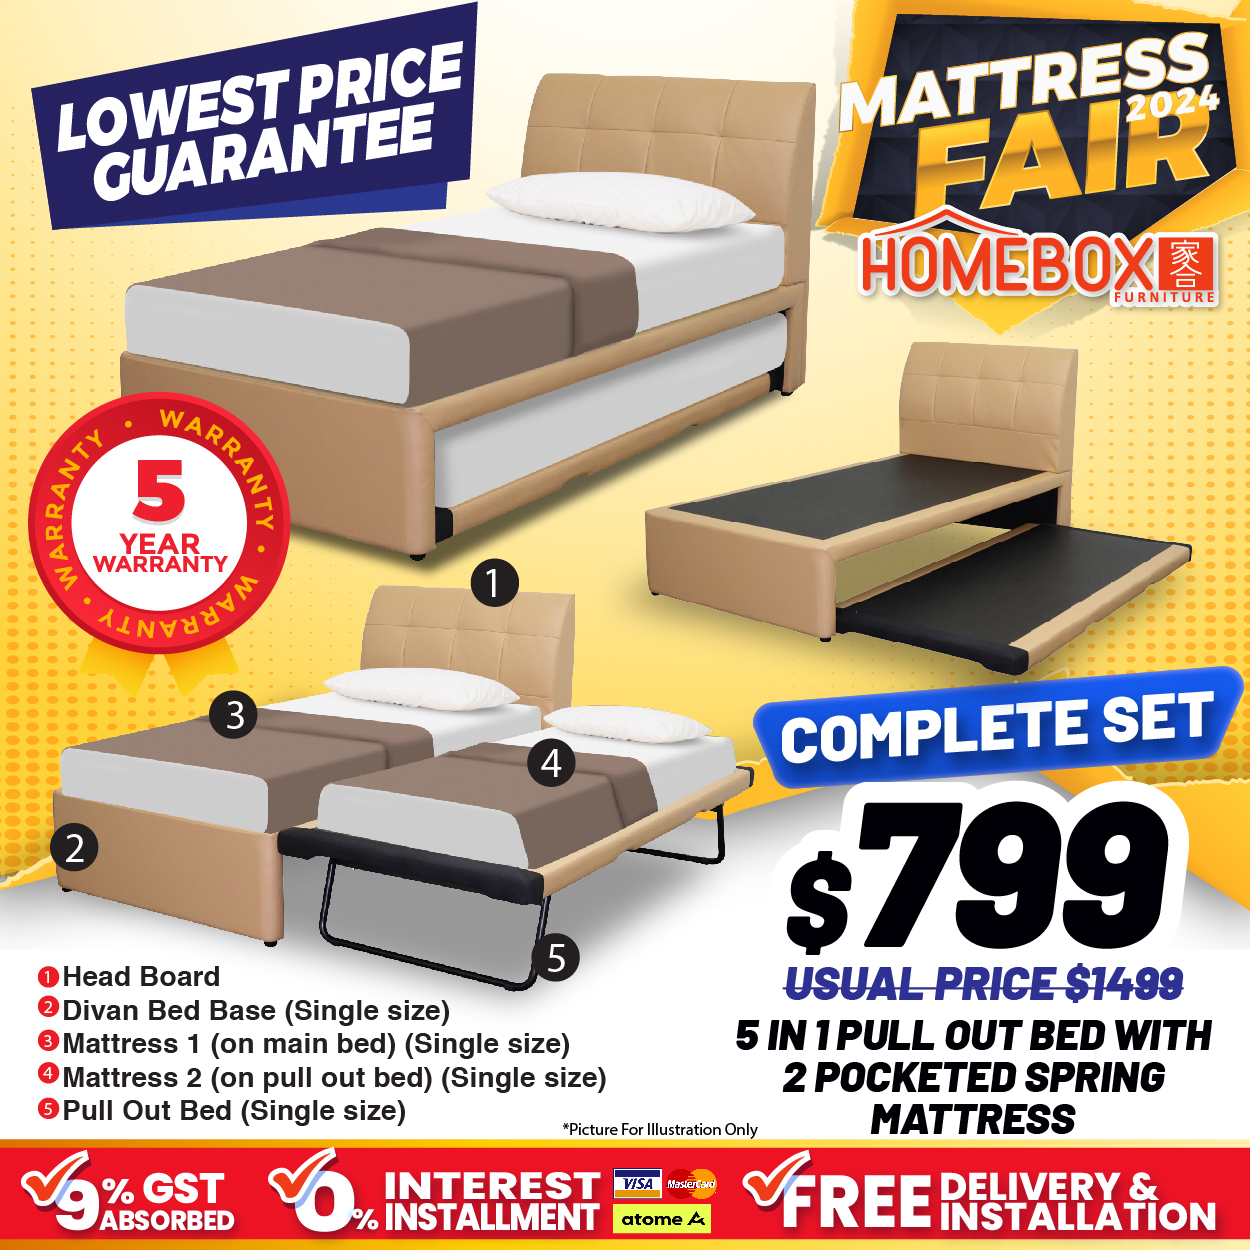 Lobang: Homebox's Biggest Mattress Fair in Aljunied Has Everything At Up To 80% Off From Now Till 5 May 24. Get A Free Mattres Upgrade During The Sale! - 15